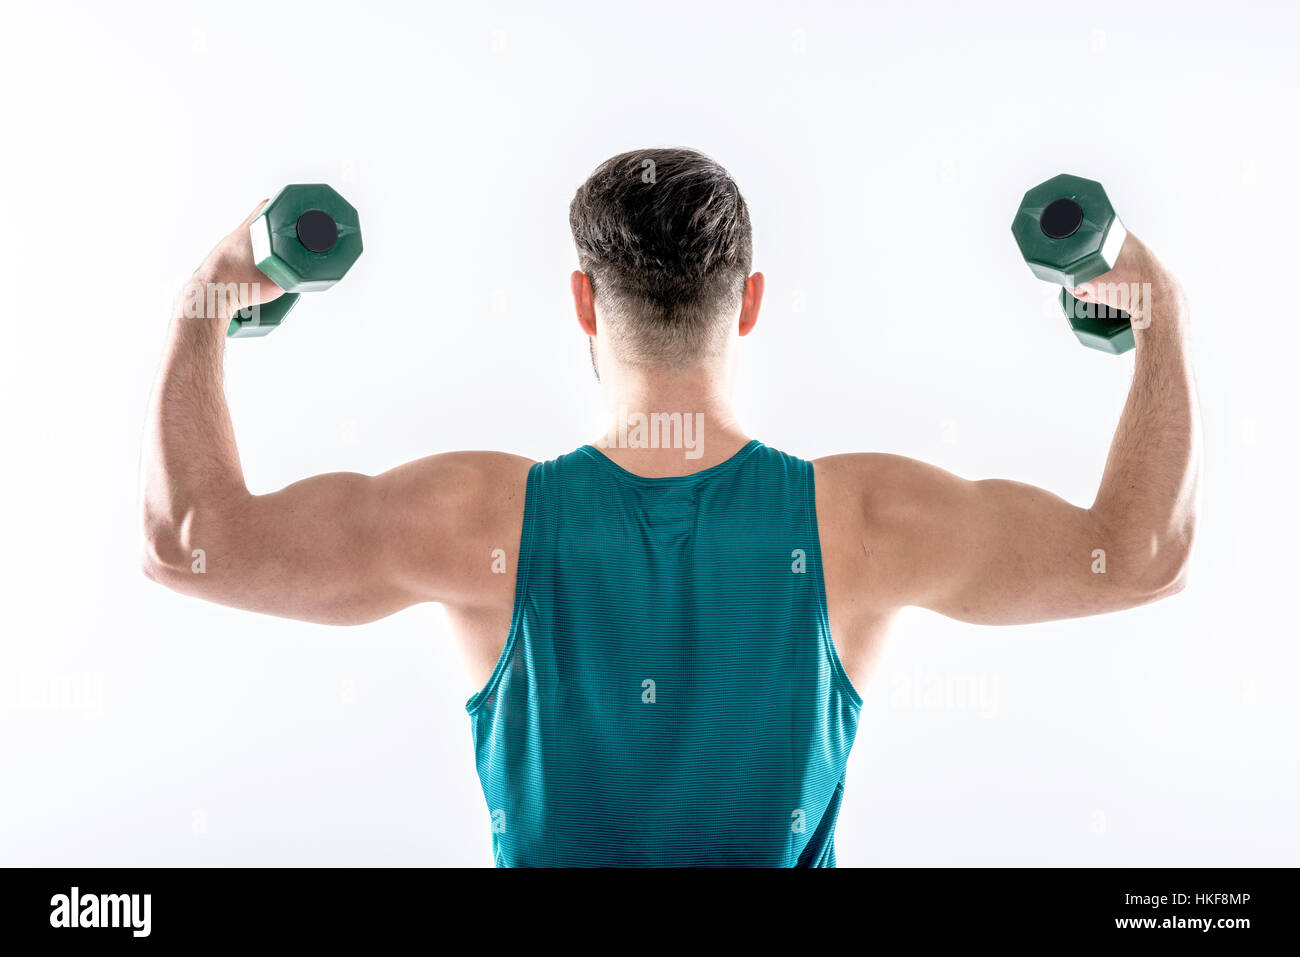 Man exercising with dumbbells Stock Photo